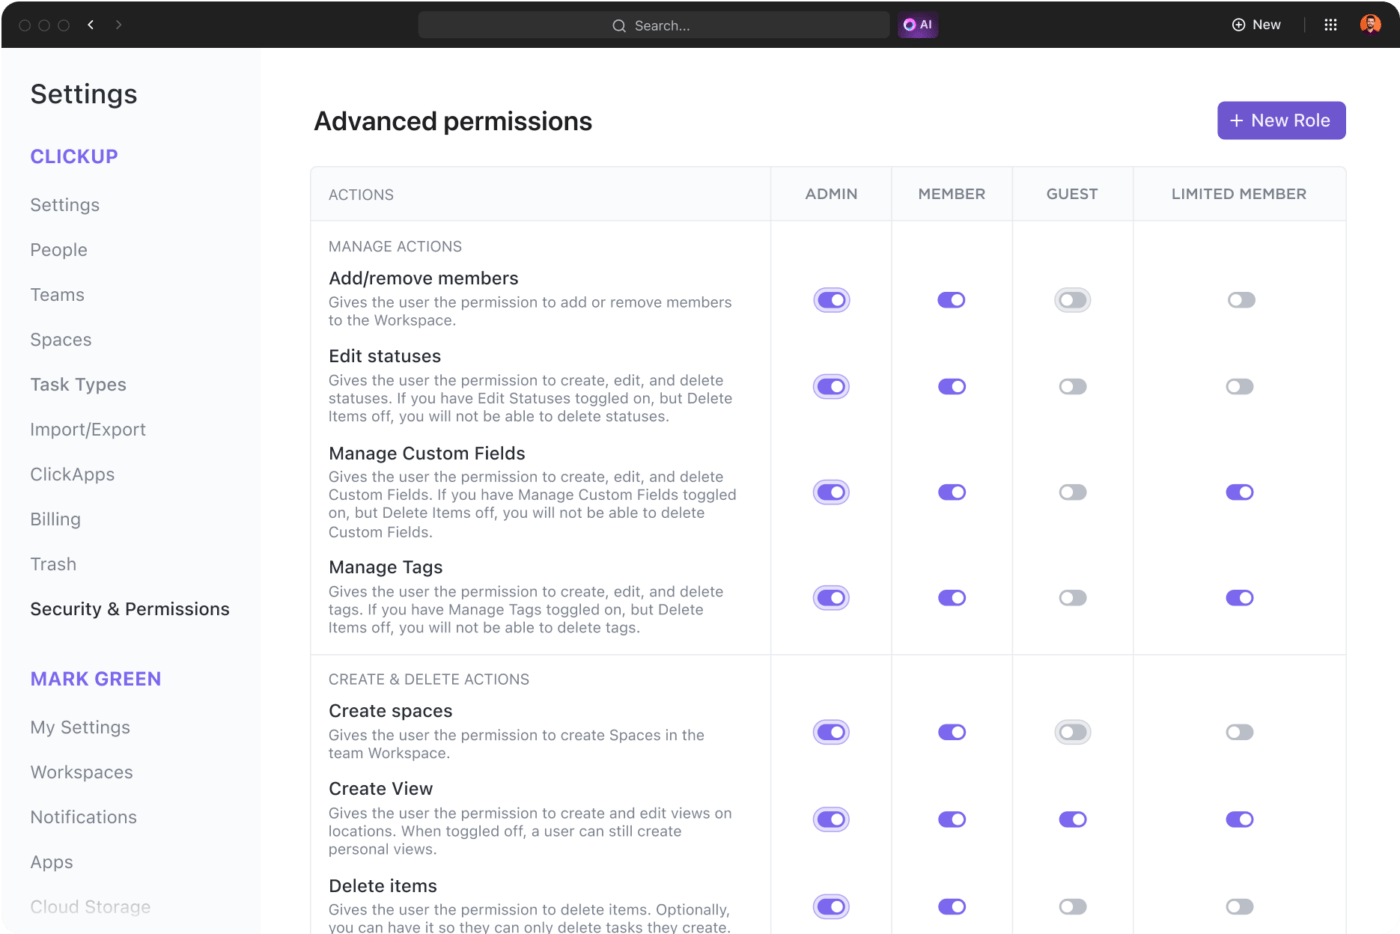 ClickUp 3.0 Permissions simplified